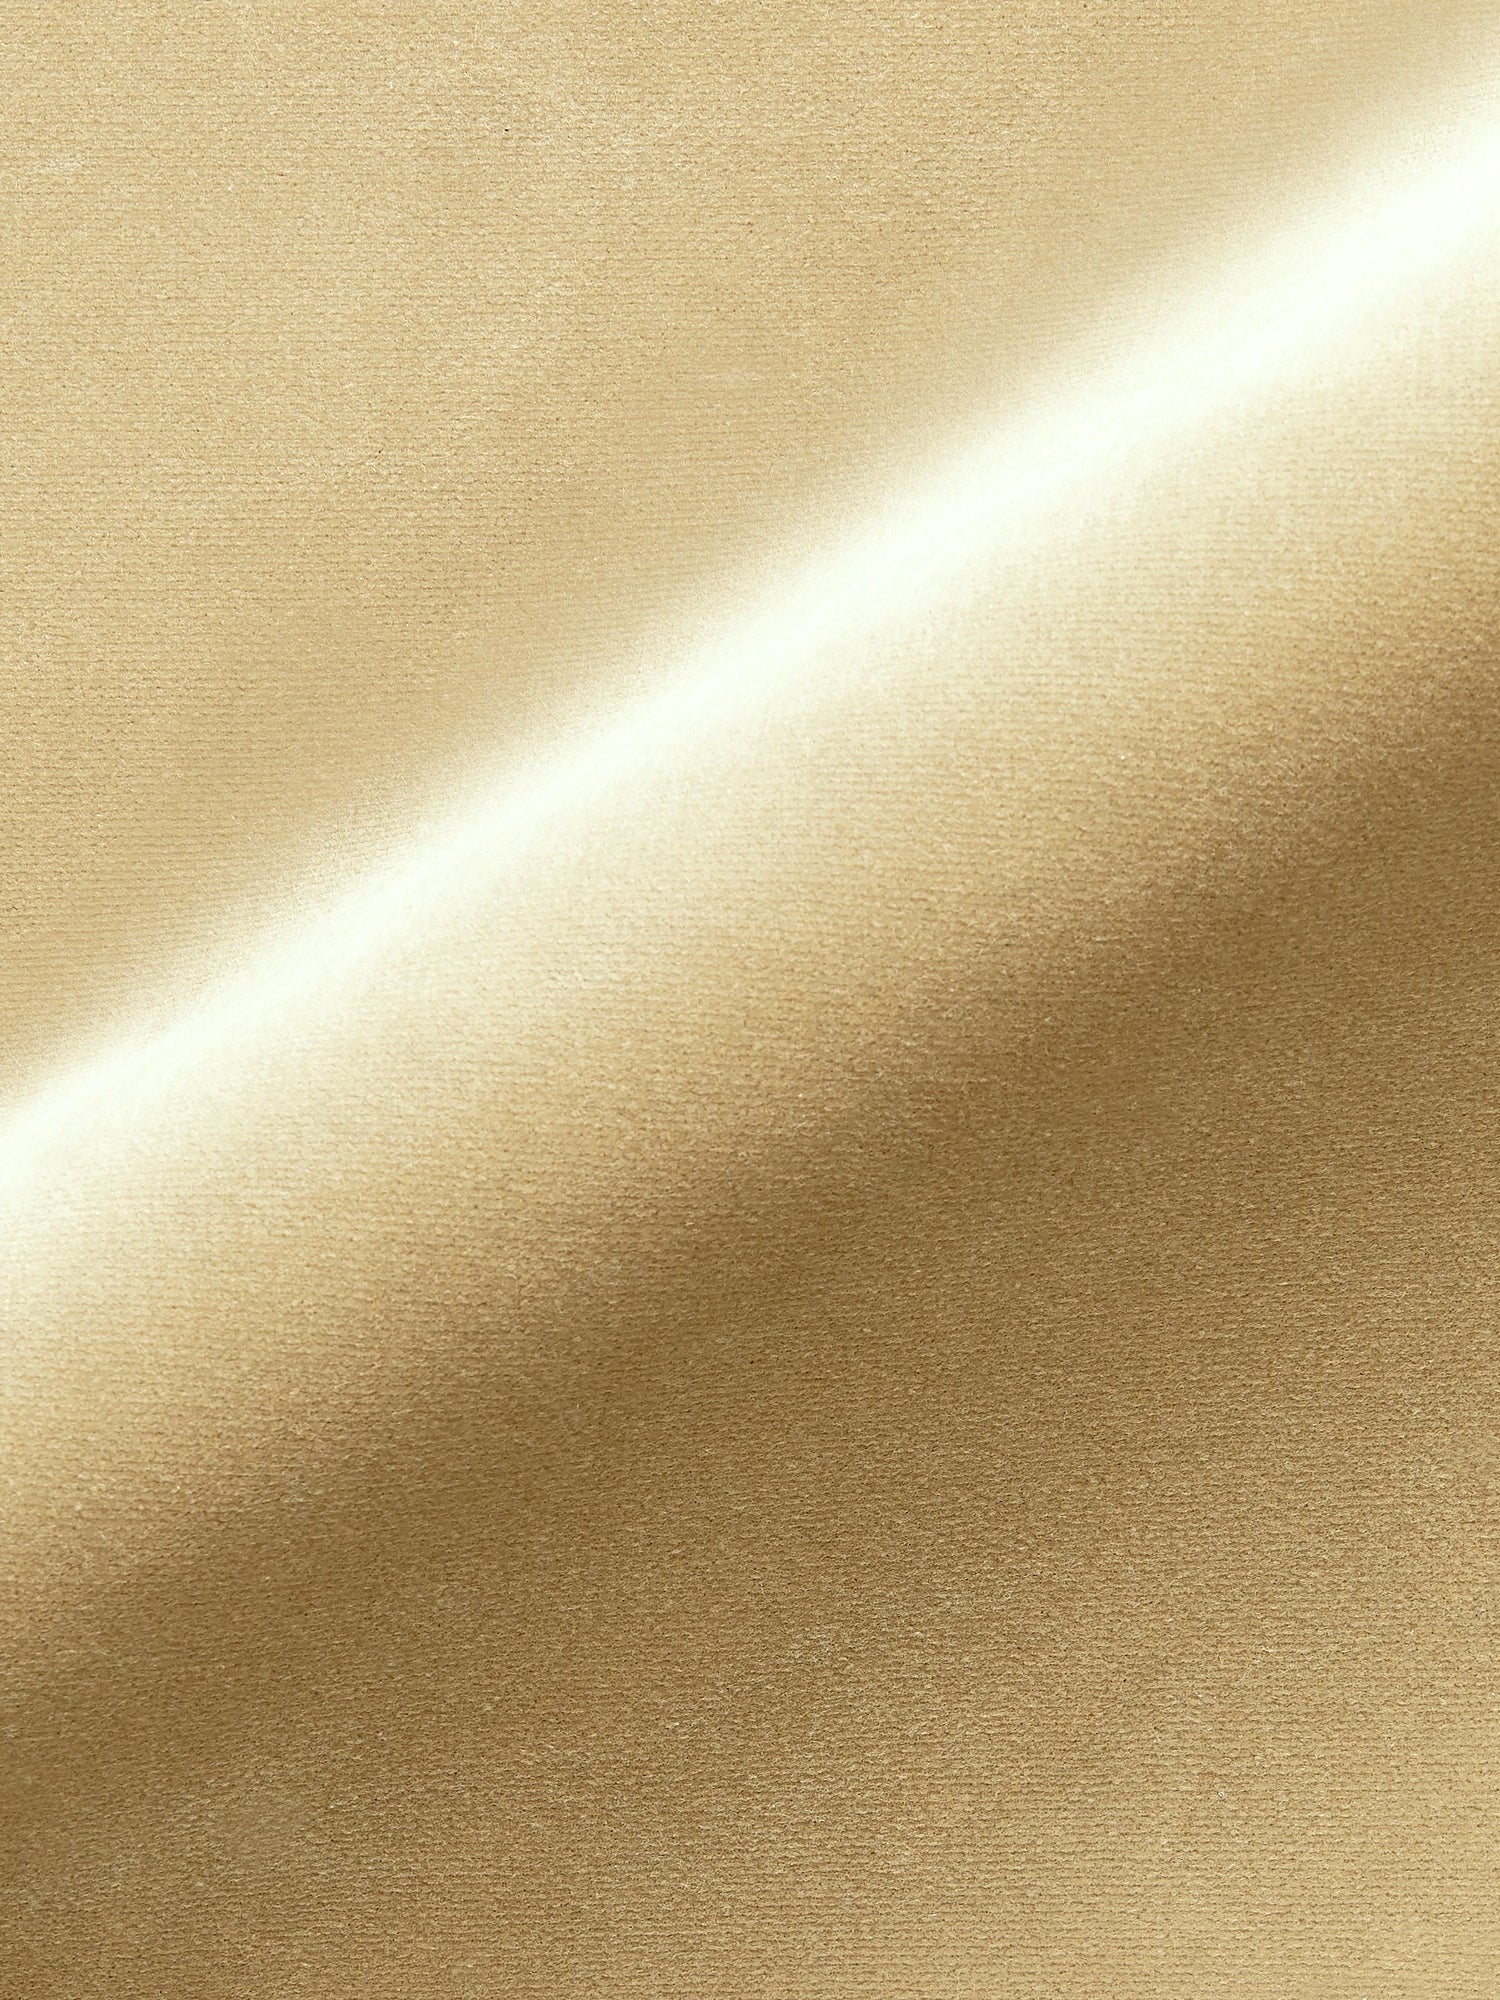 Torino Velvet fabric in sand color - pattern number MT 00031247 - by Scalamandre in the Old World Weavers collection